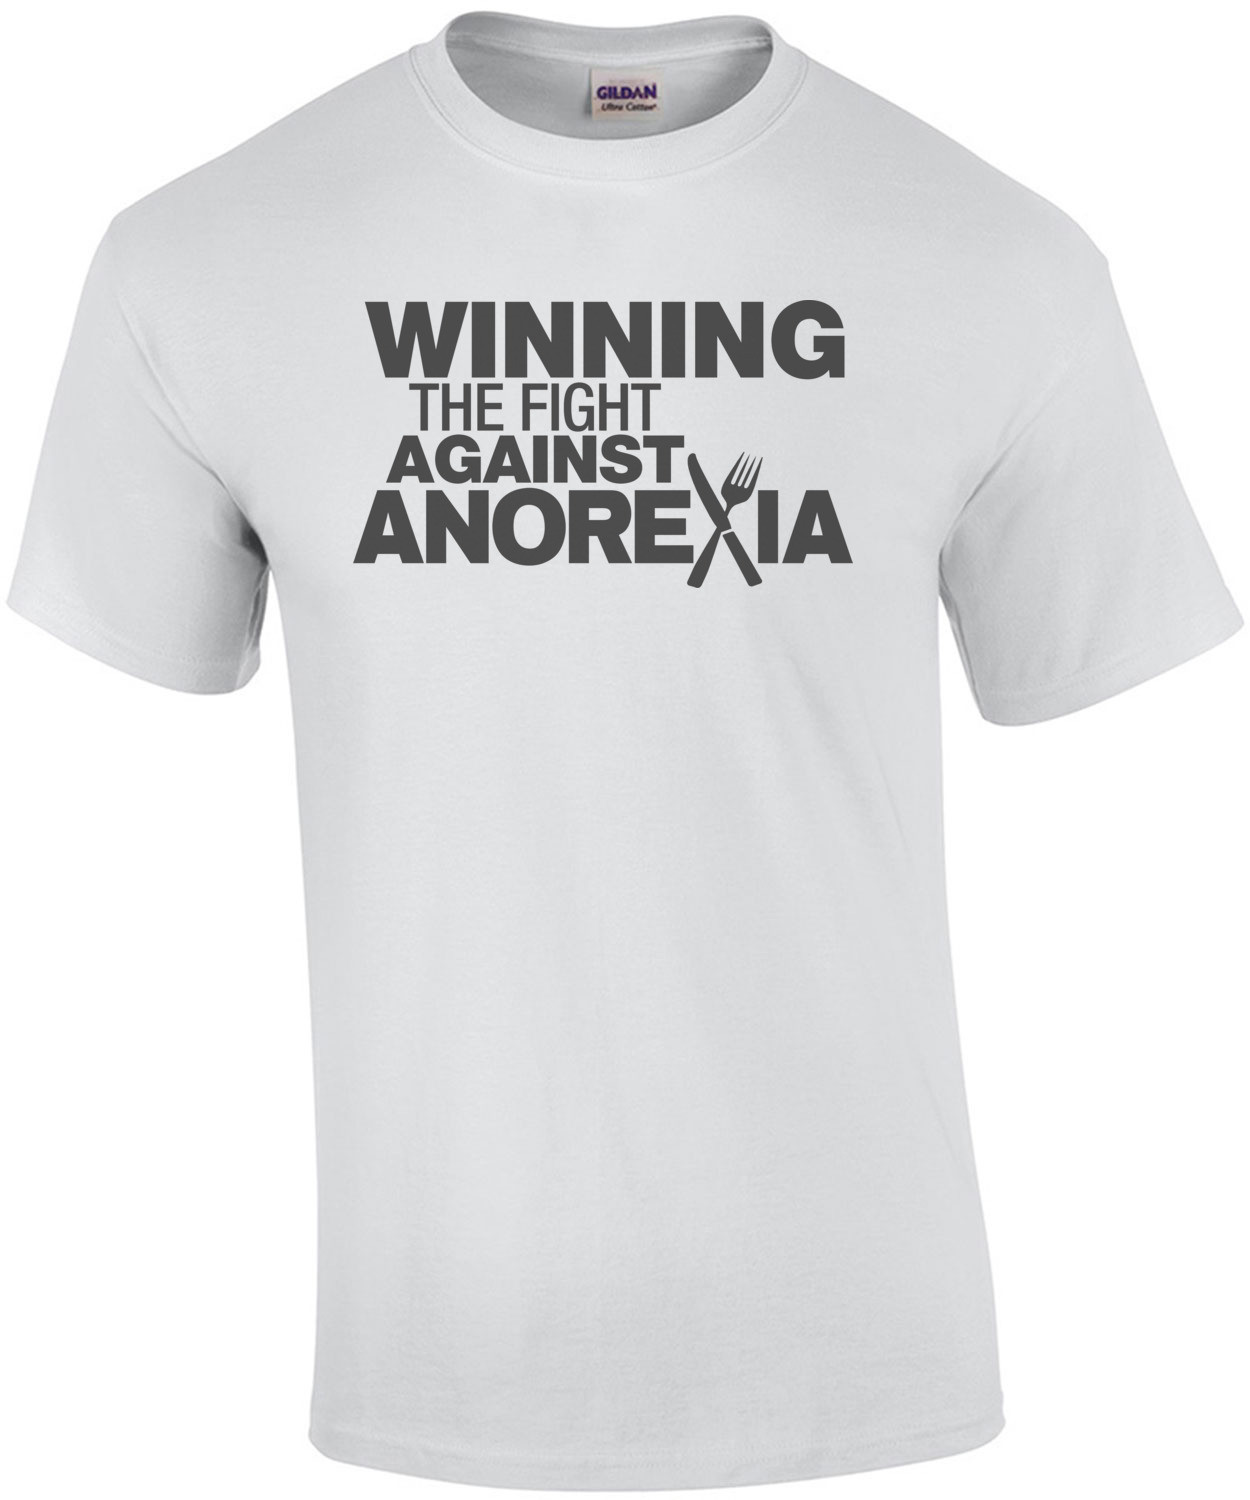 WINNING IN THE FIGHT AGAINST ANOREXIA Shirt